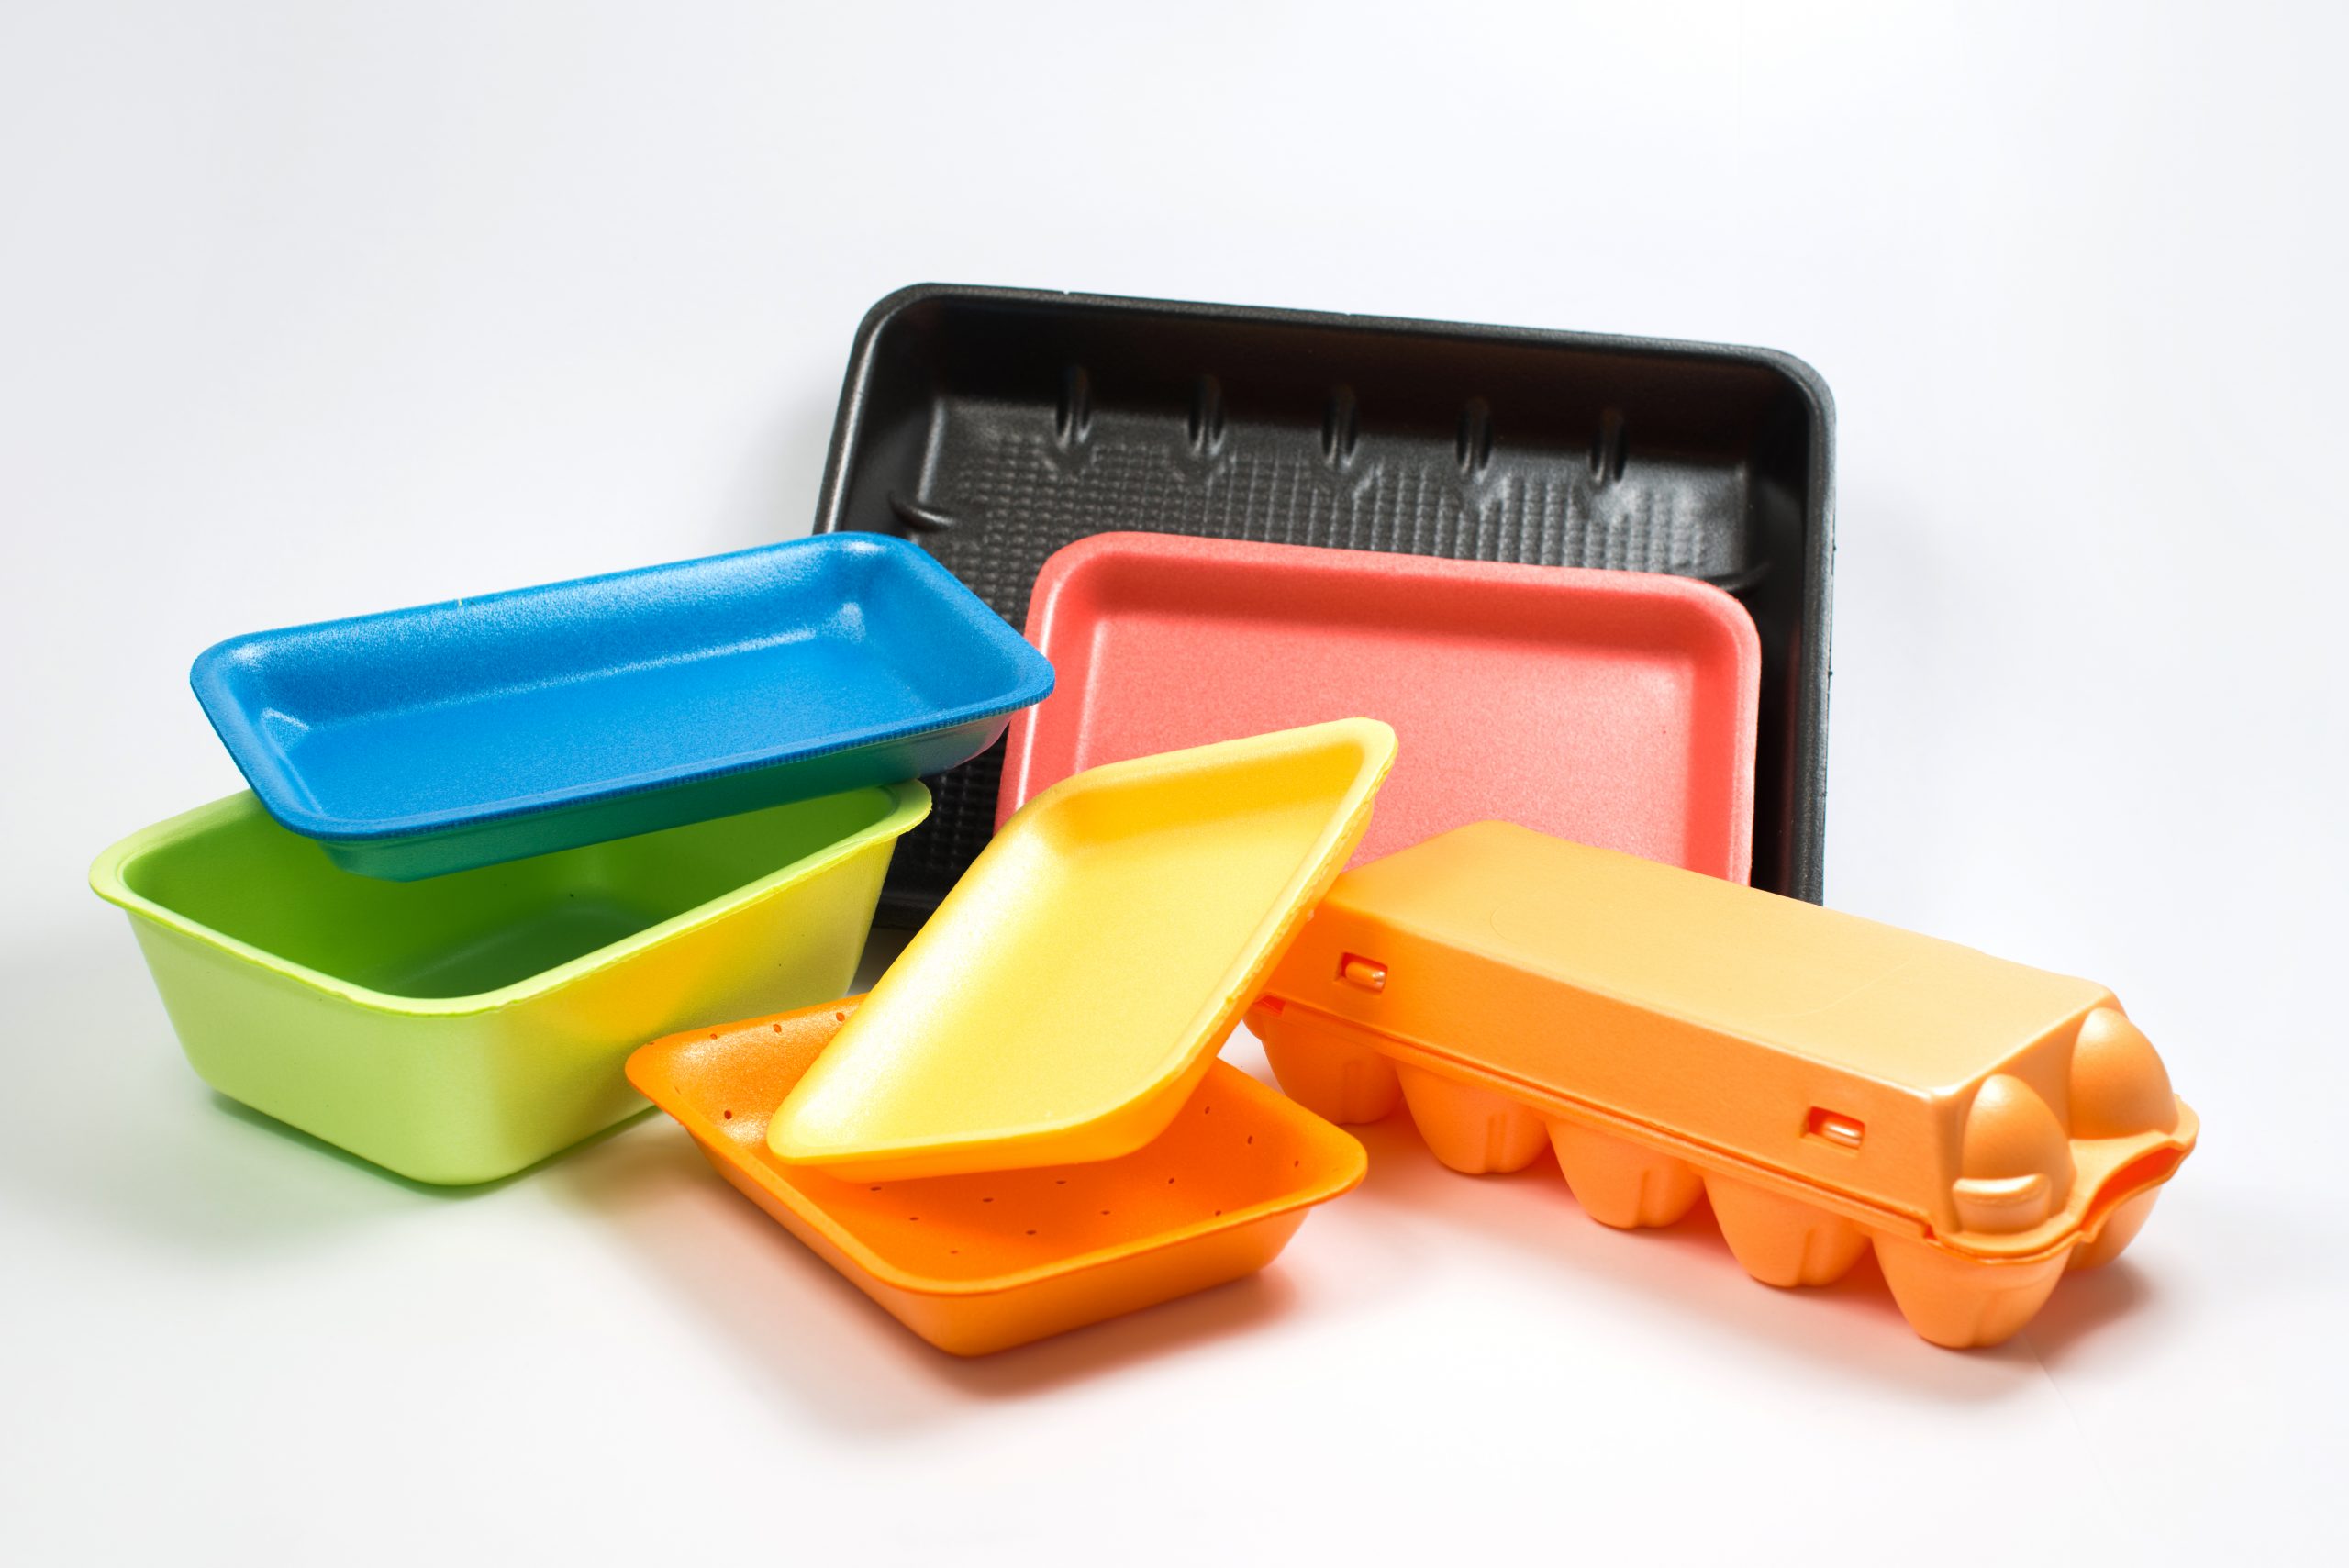 Plastic food containers for packaging liquid and solid